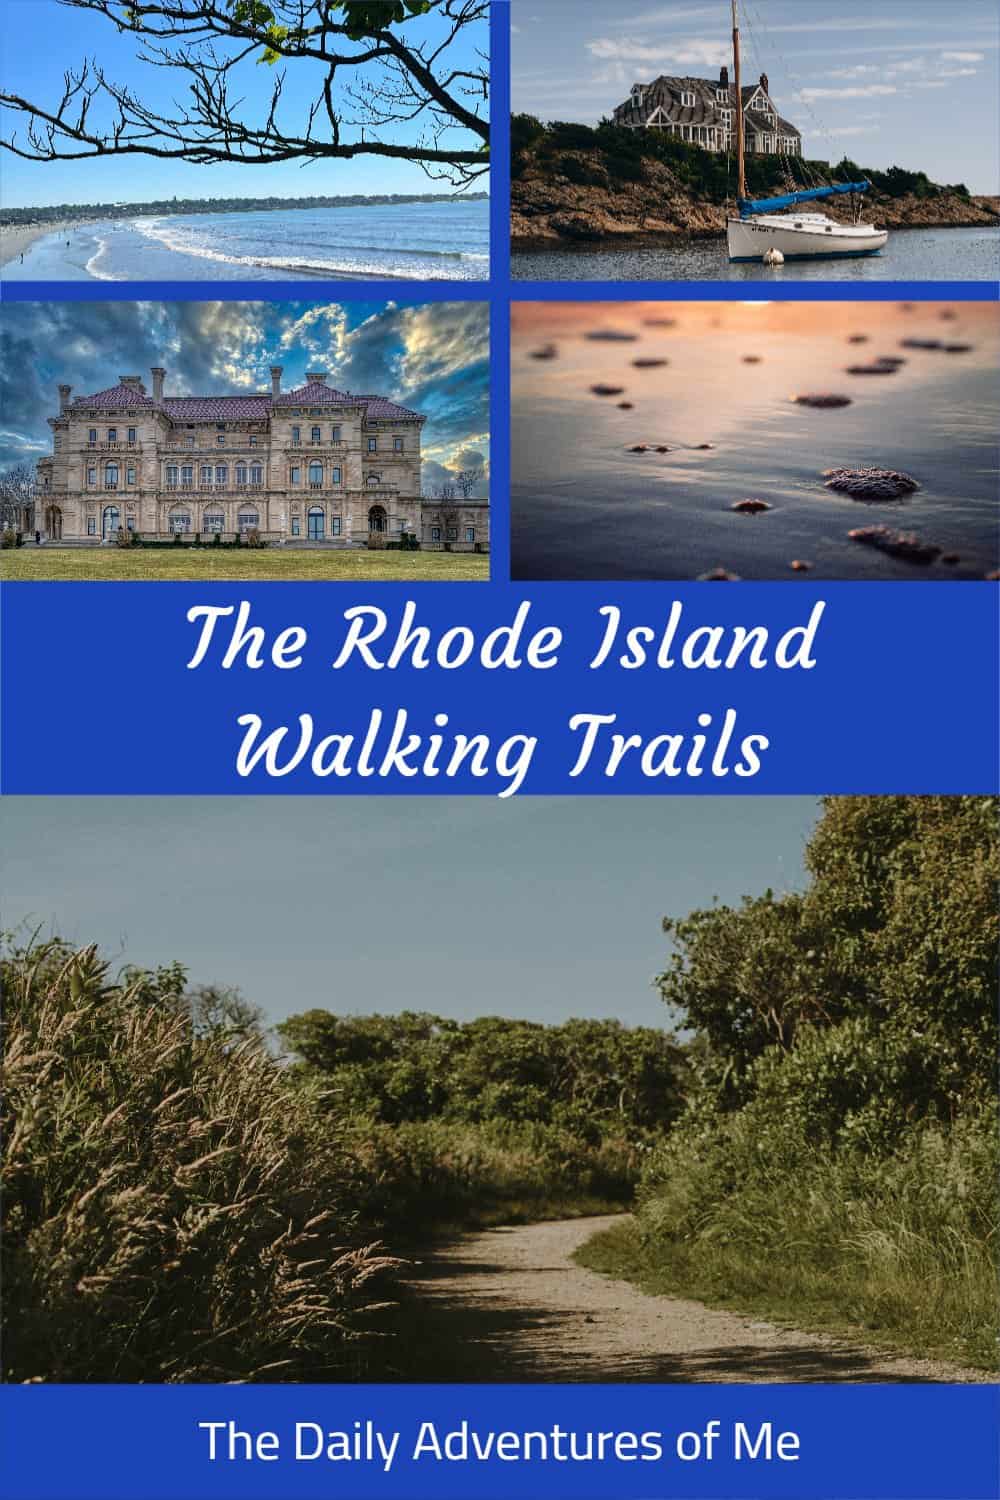 Get outside in Rhode Island, New England, USA with this list of easy walks around the state. #VisitRhodeIsland